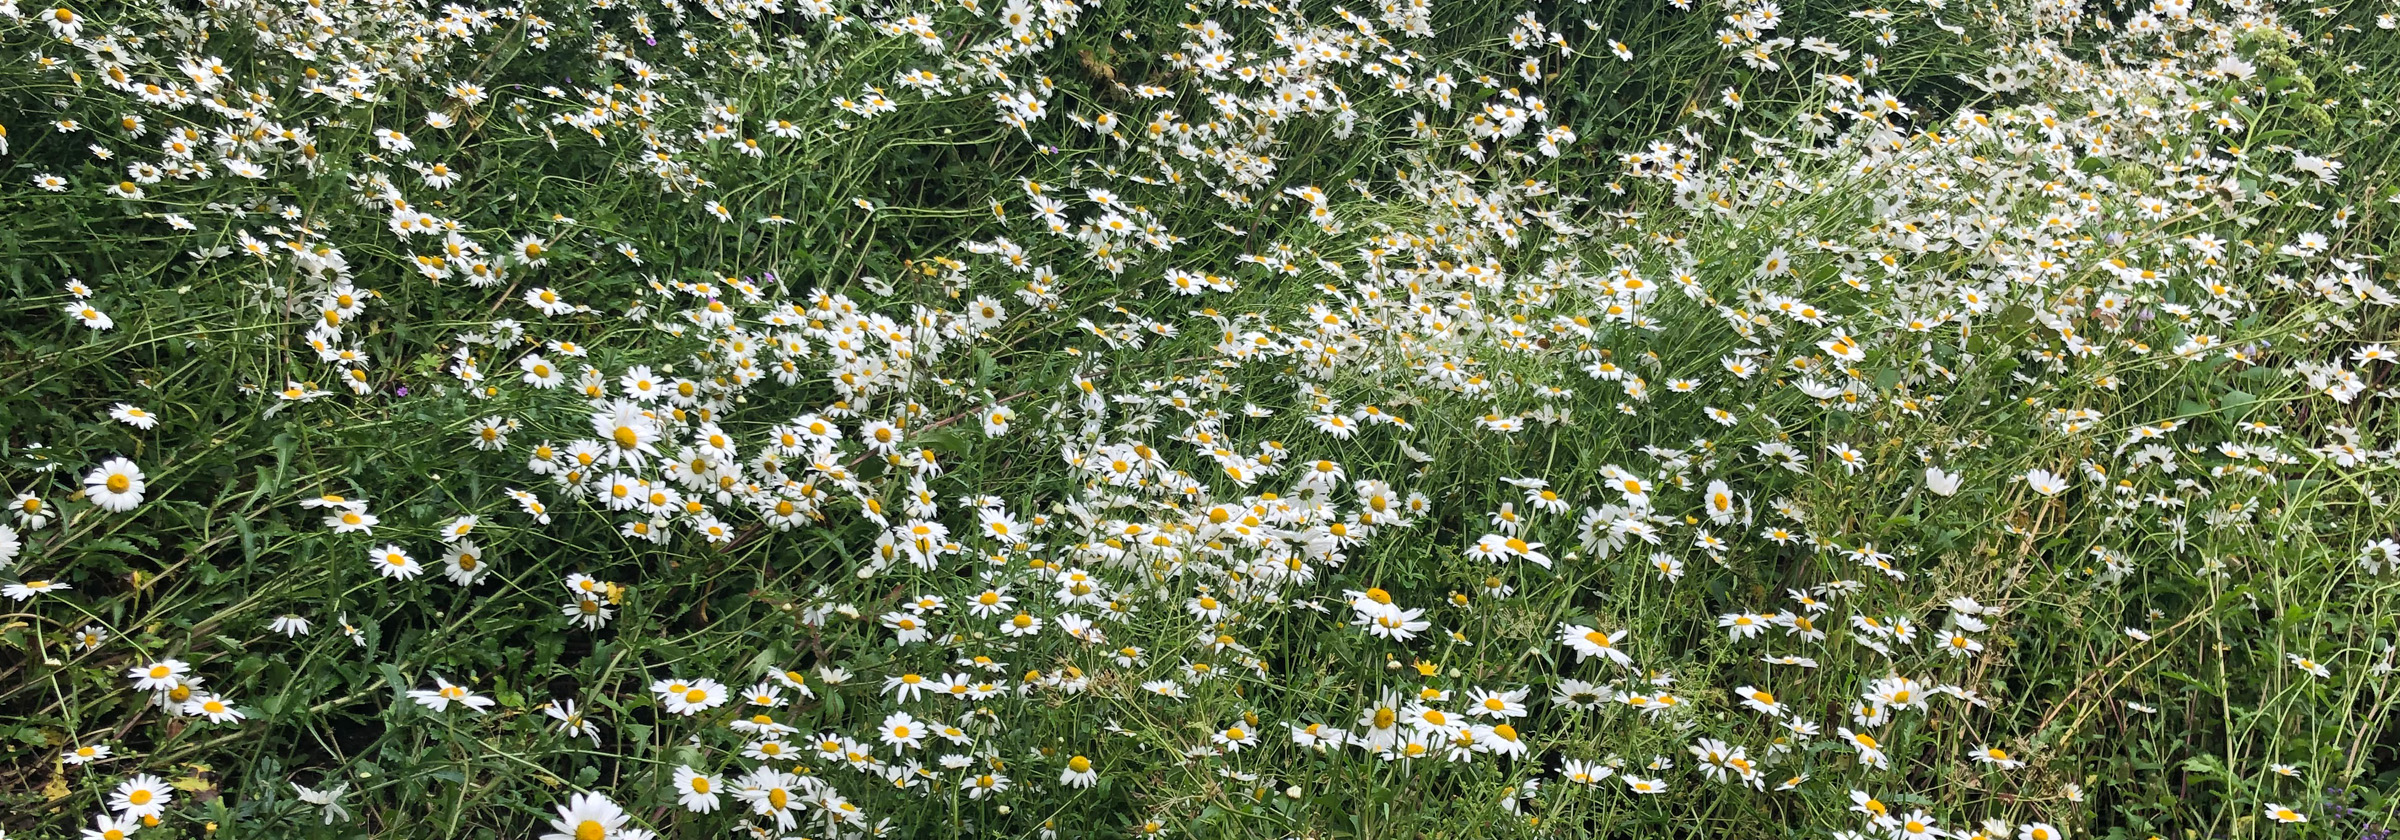 A large cluster of daisies 